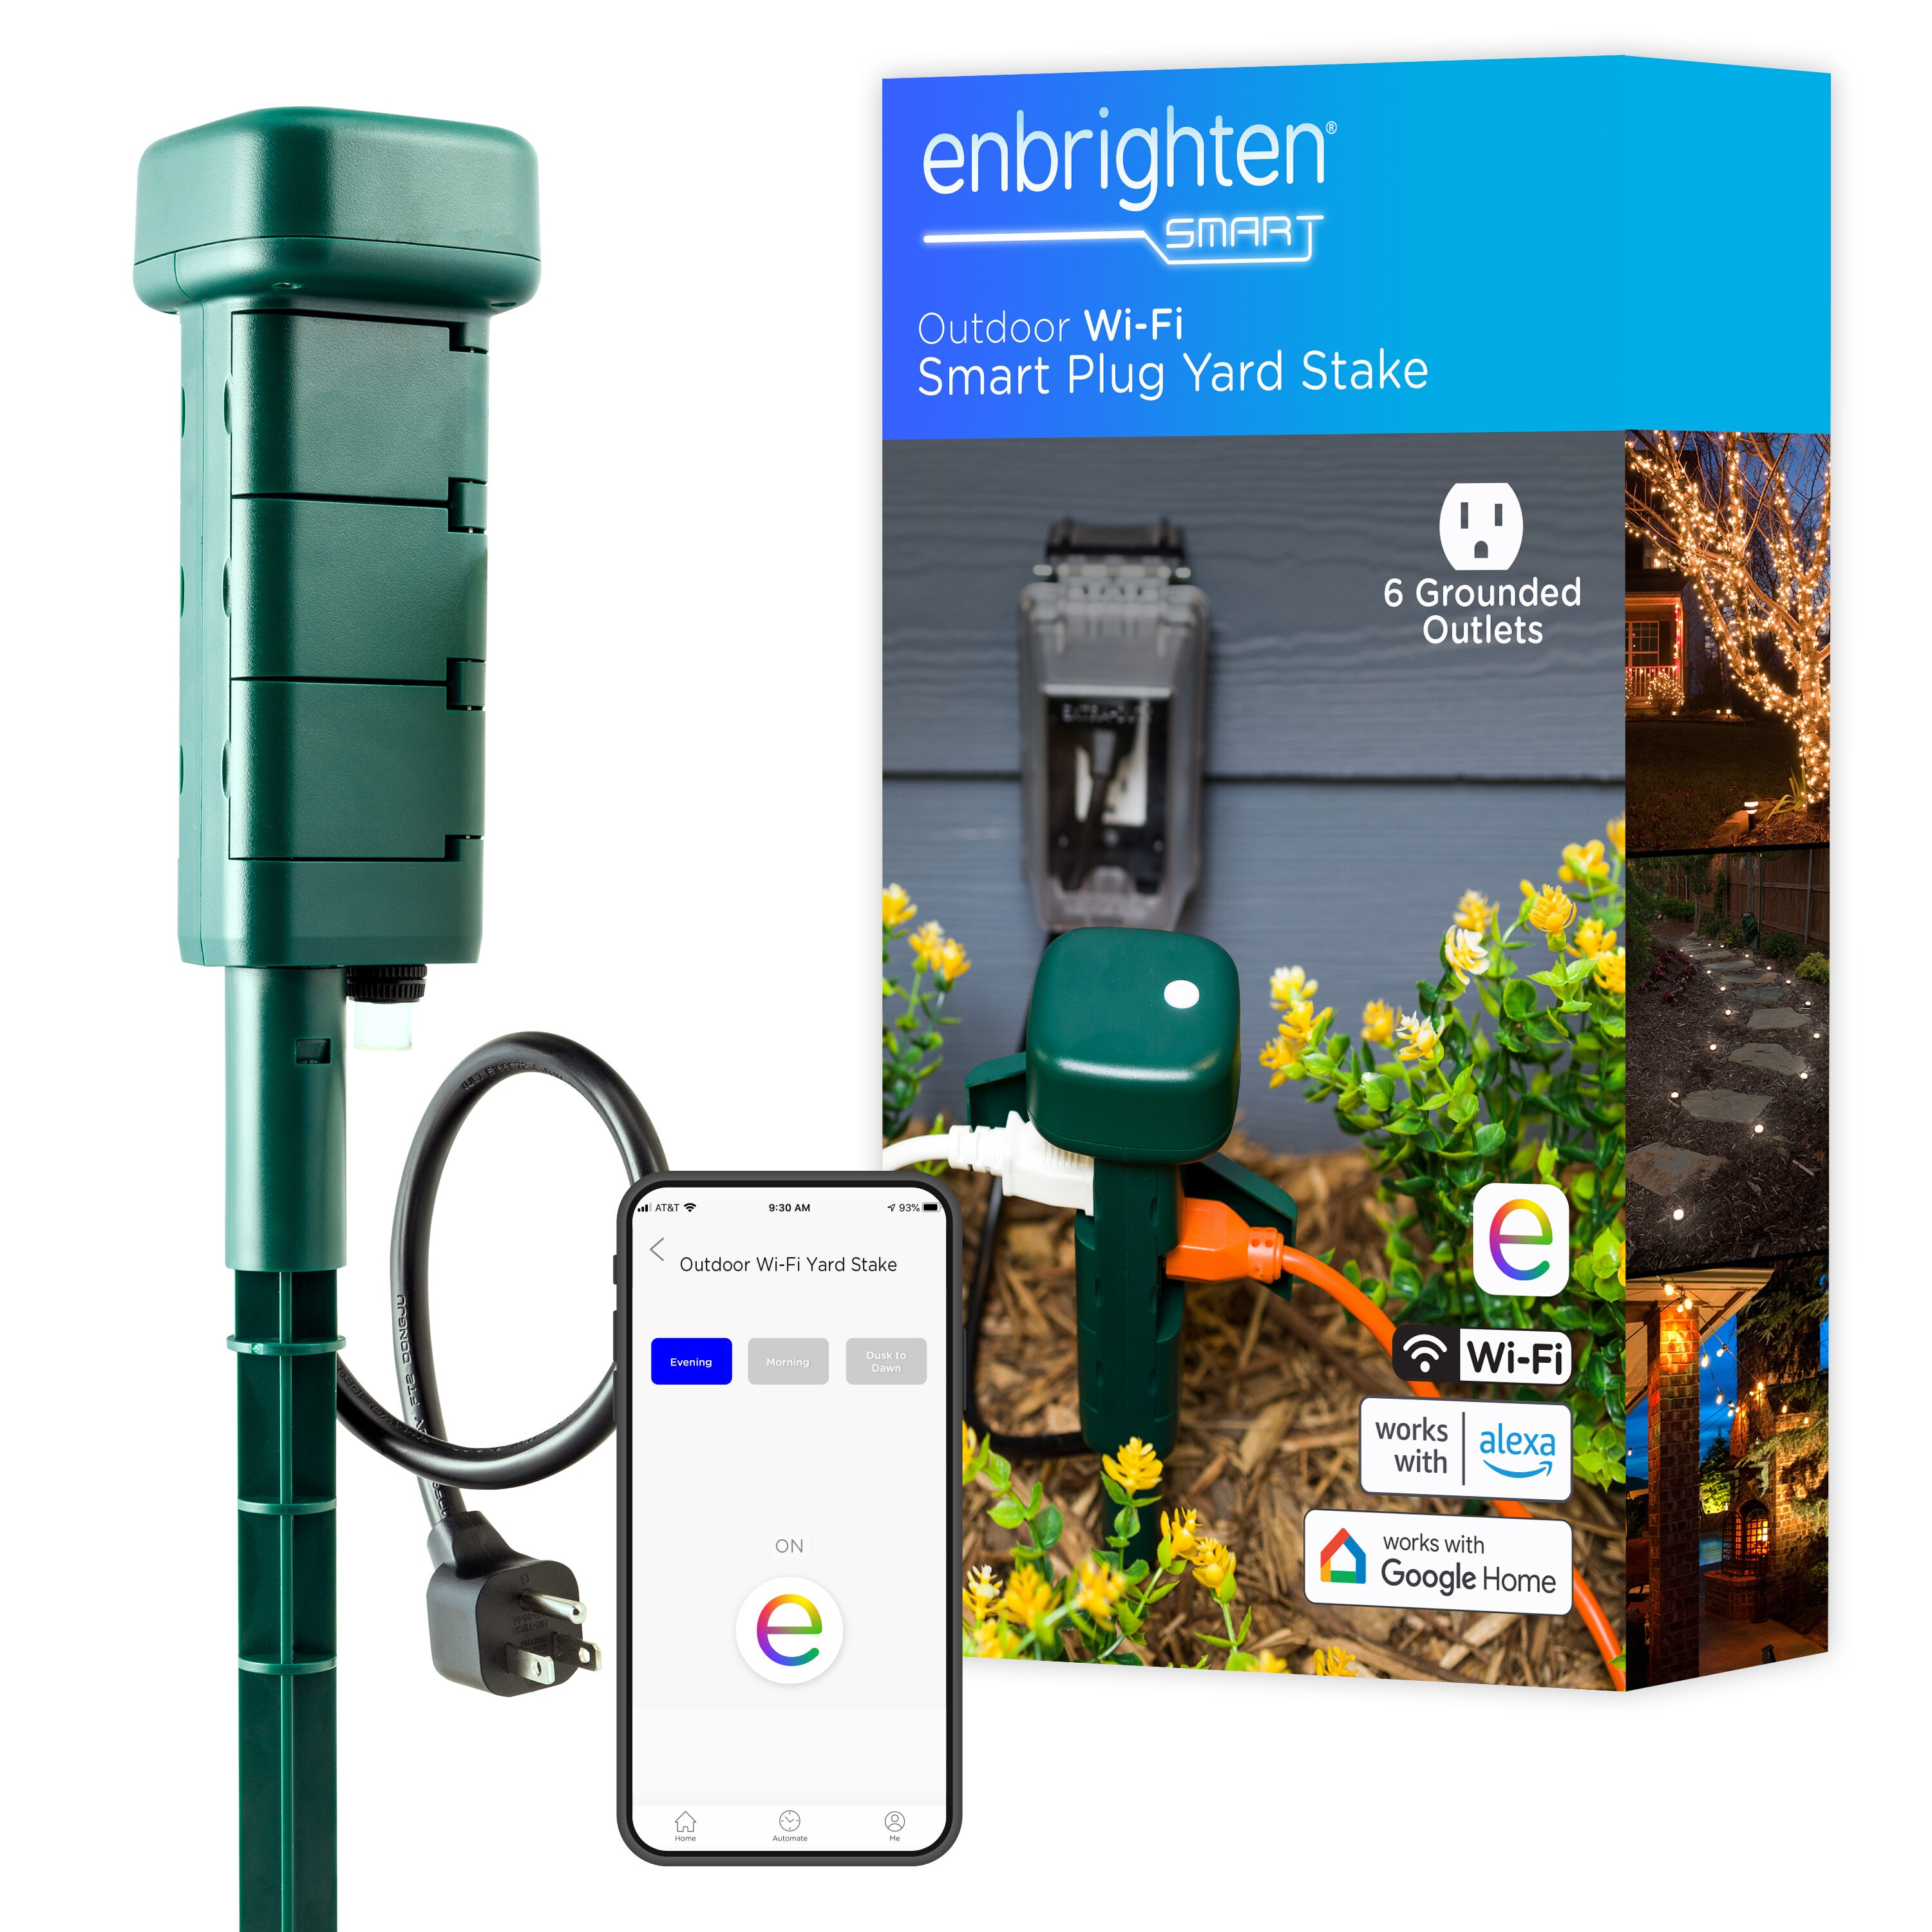 74517: Enbrighten Outdoor Wi-Fi Smart Plug Yard Stake - Overview 